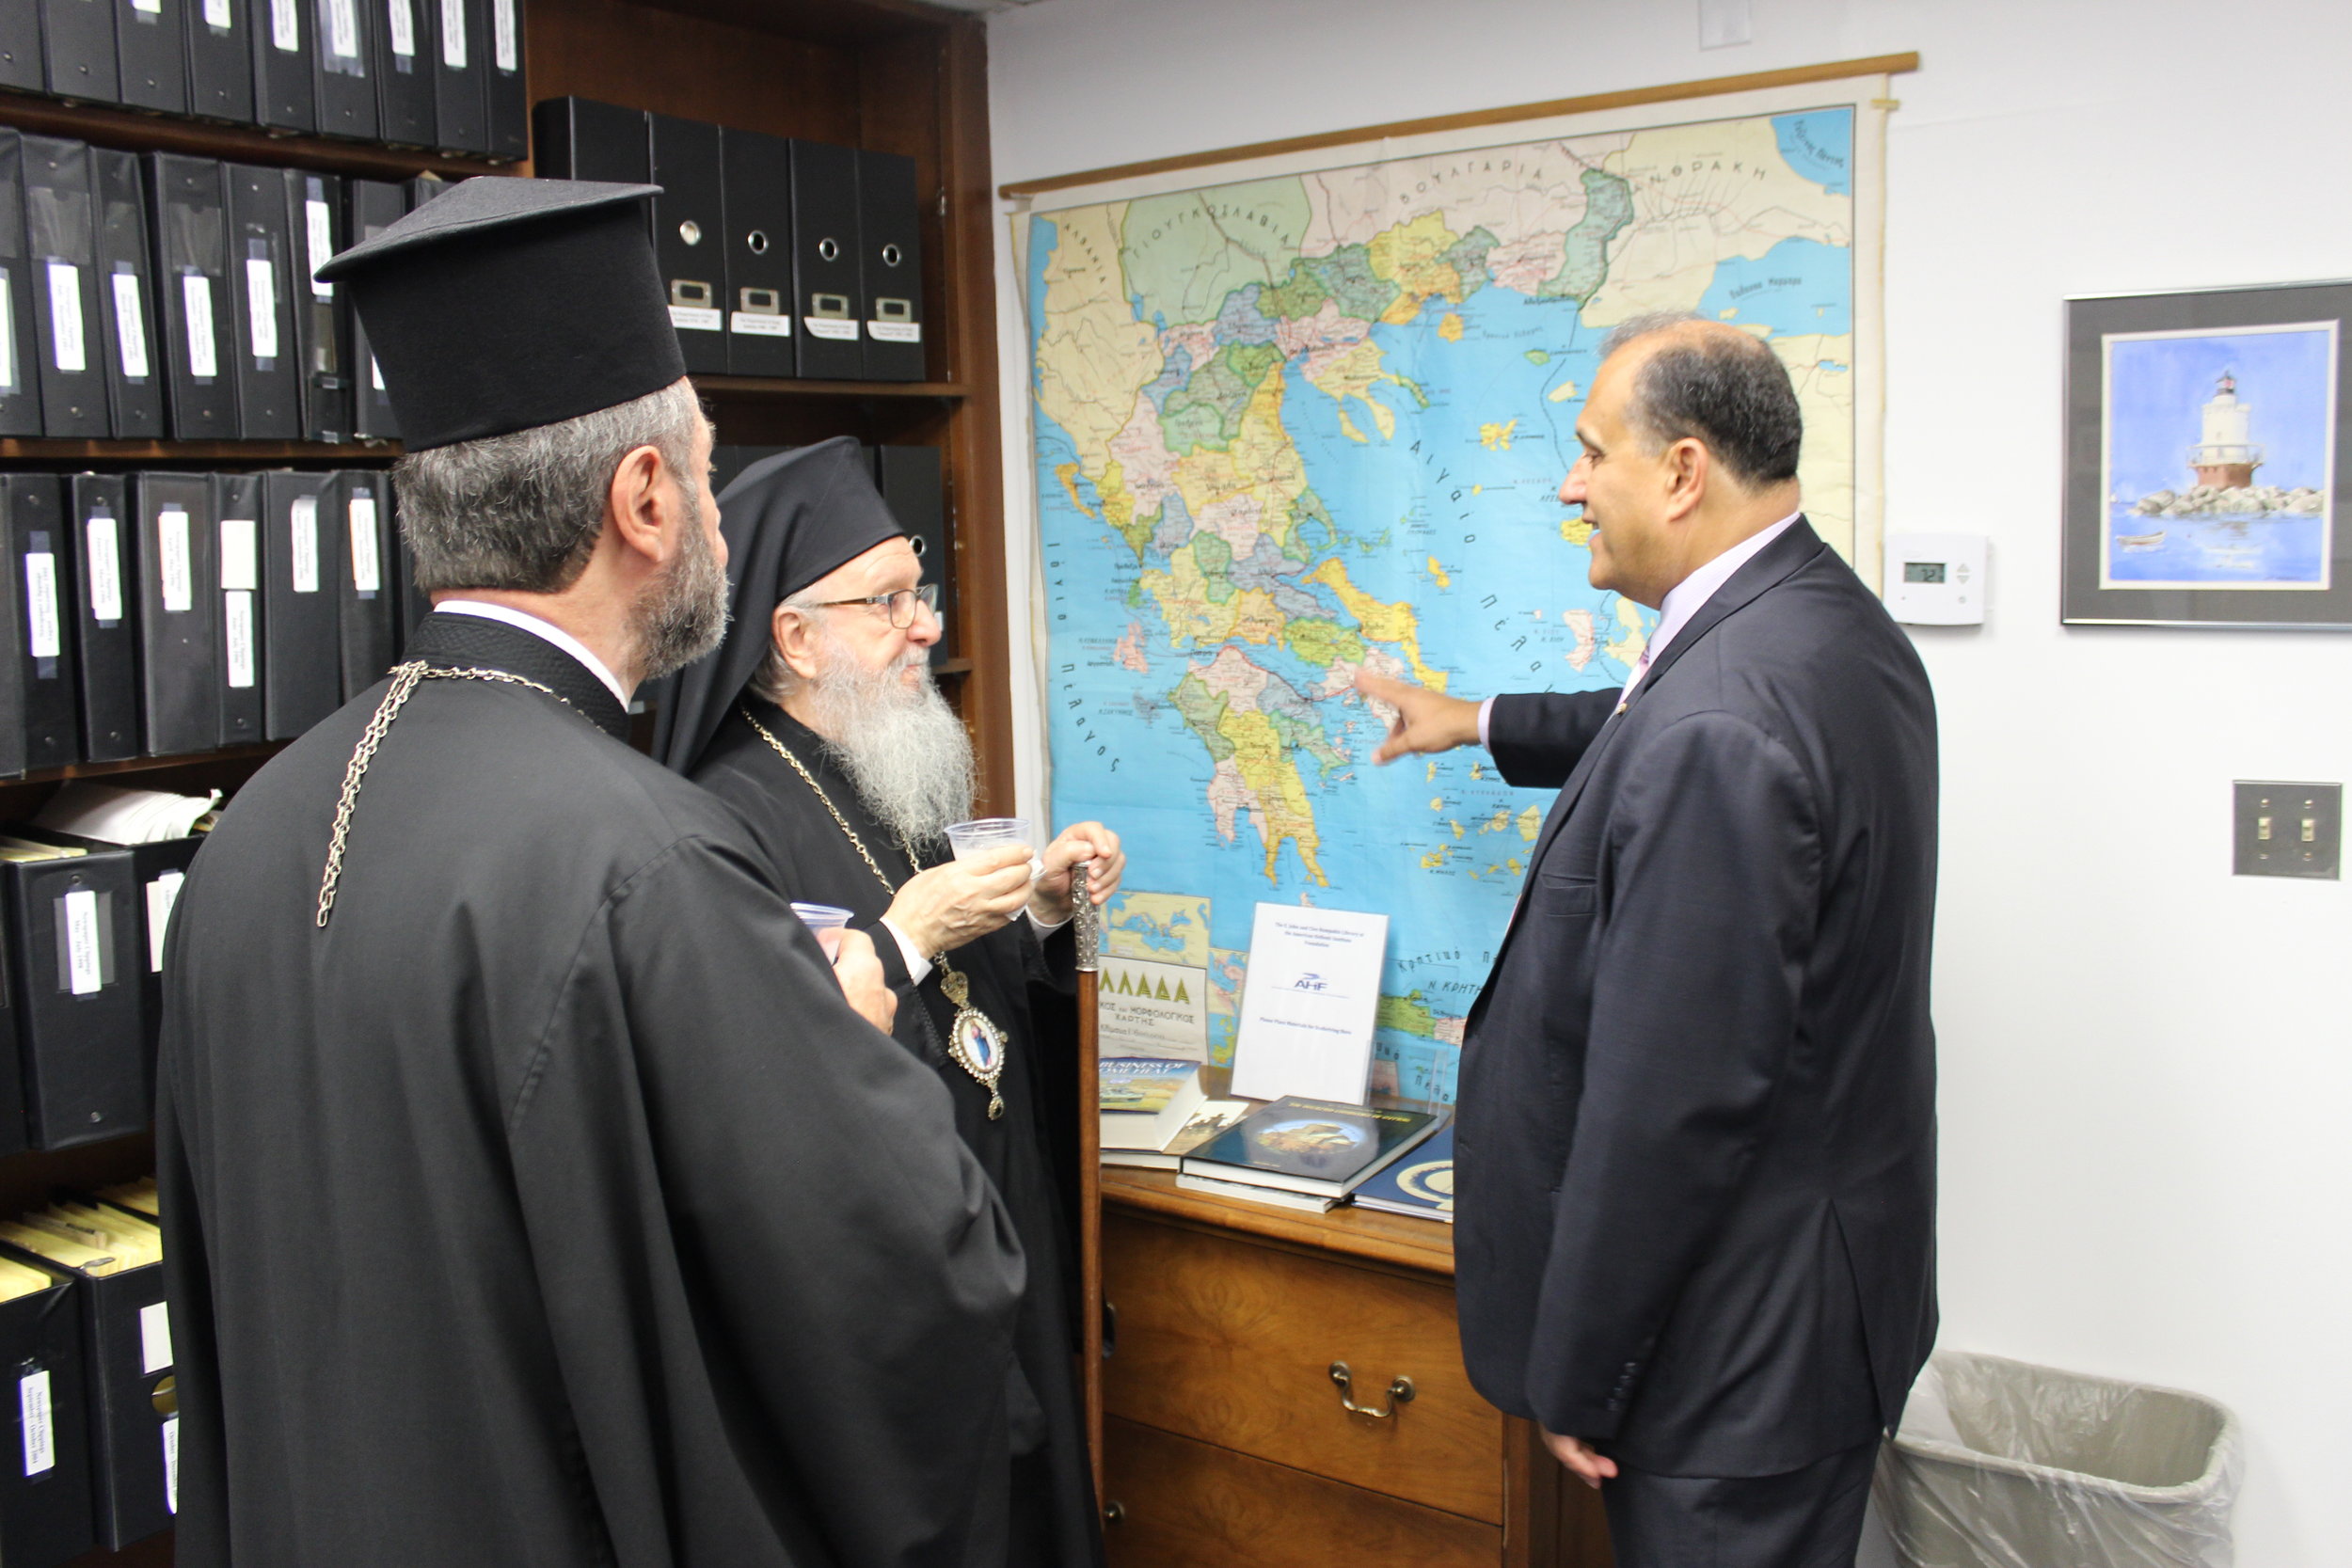  His Eminence Archbishop Demetrios of America, AHI President Nick Larigakis, and Bishop Sevastianos of Zela discussing the heritage of their families in front of a map of Greece. 